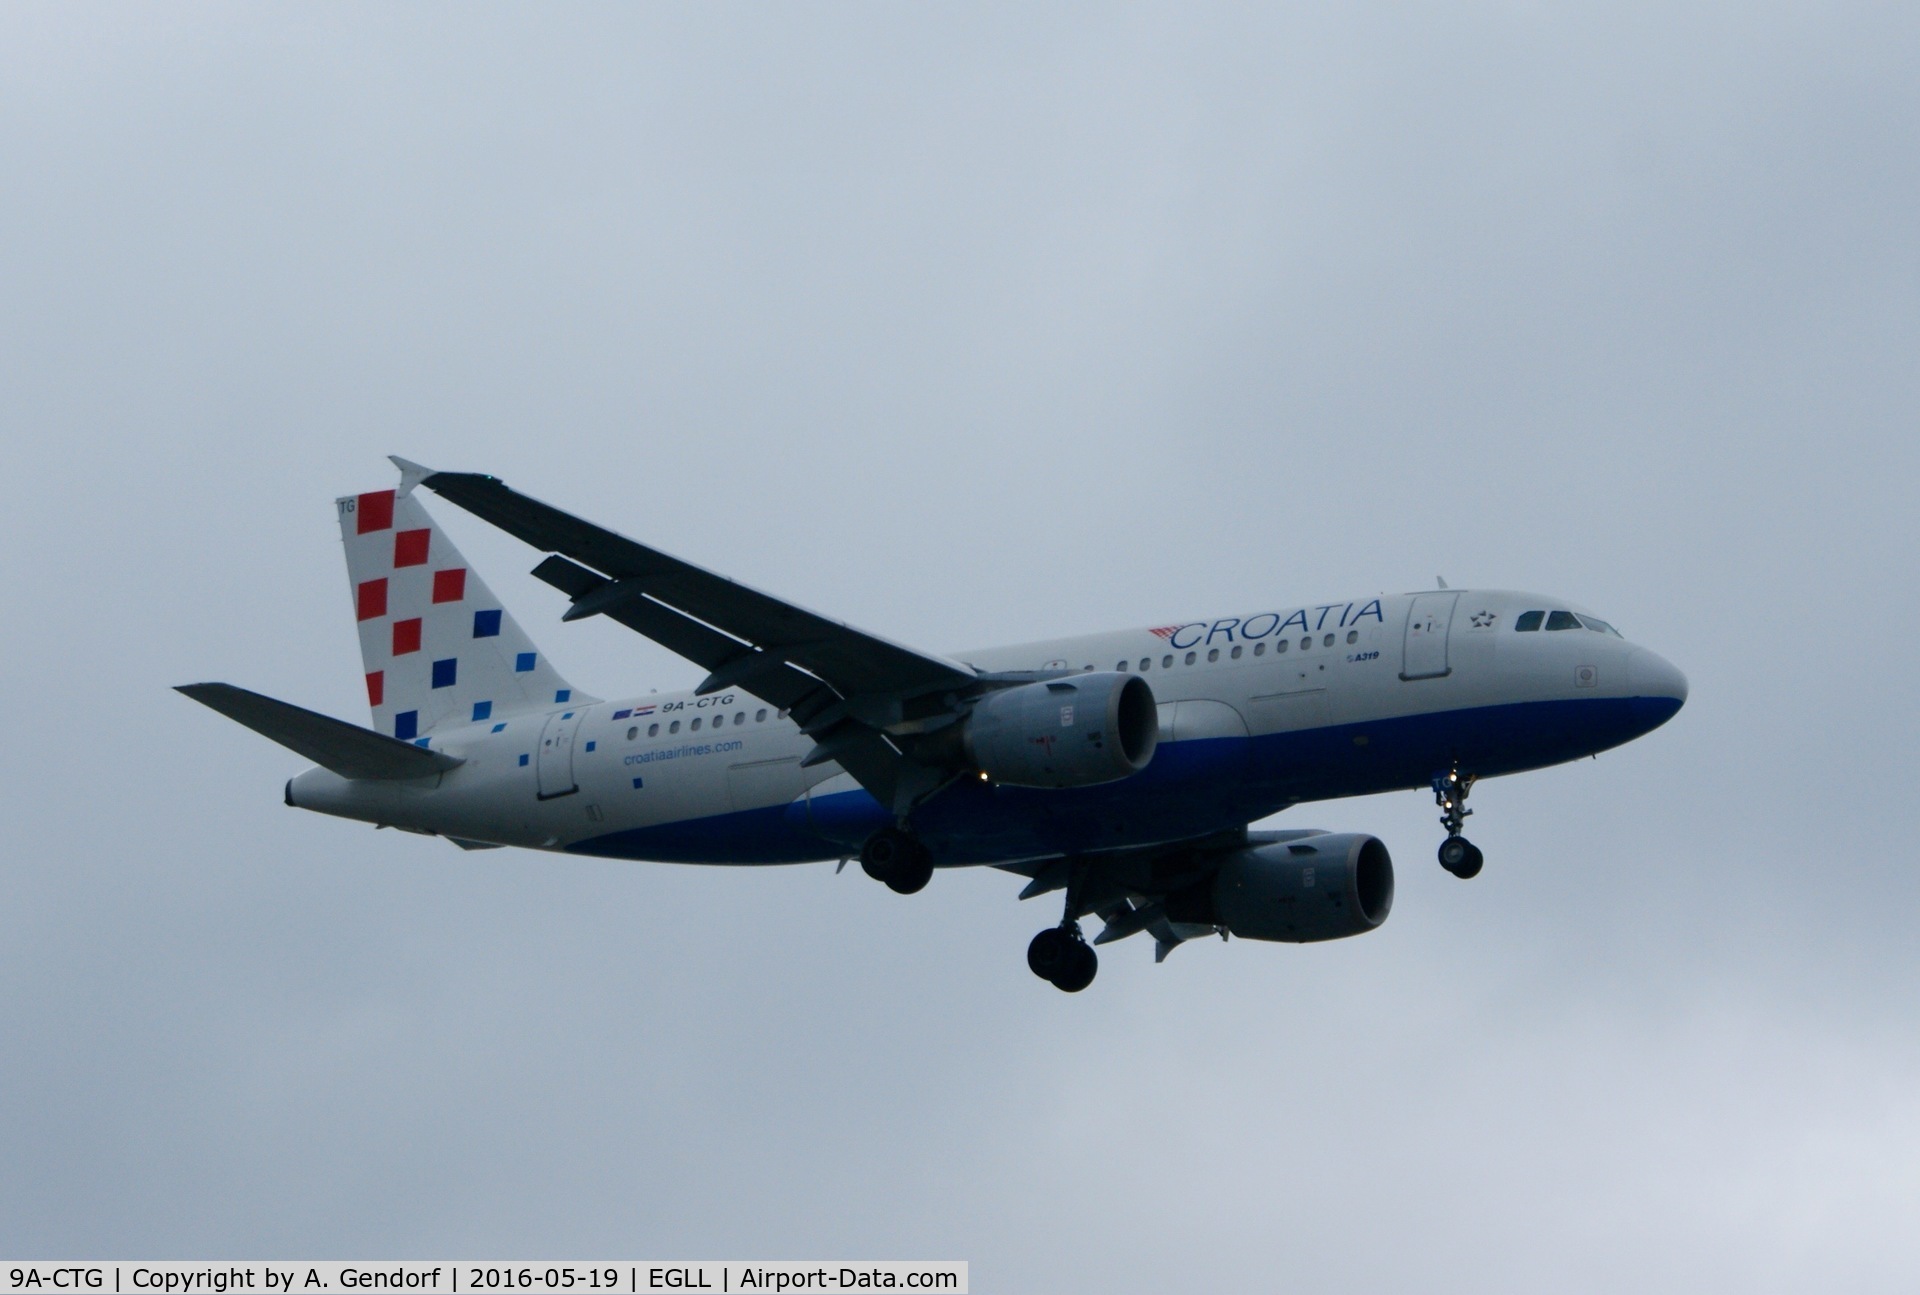 9A-CTG, 1998 Airbus A319-112 C/N 767, Croatia Airlines, is here approaching RWY 27R at London Heathrow(EGLL)